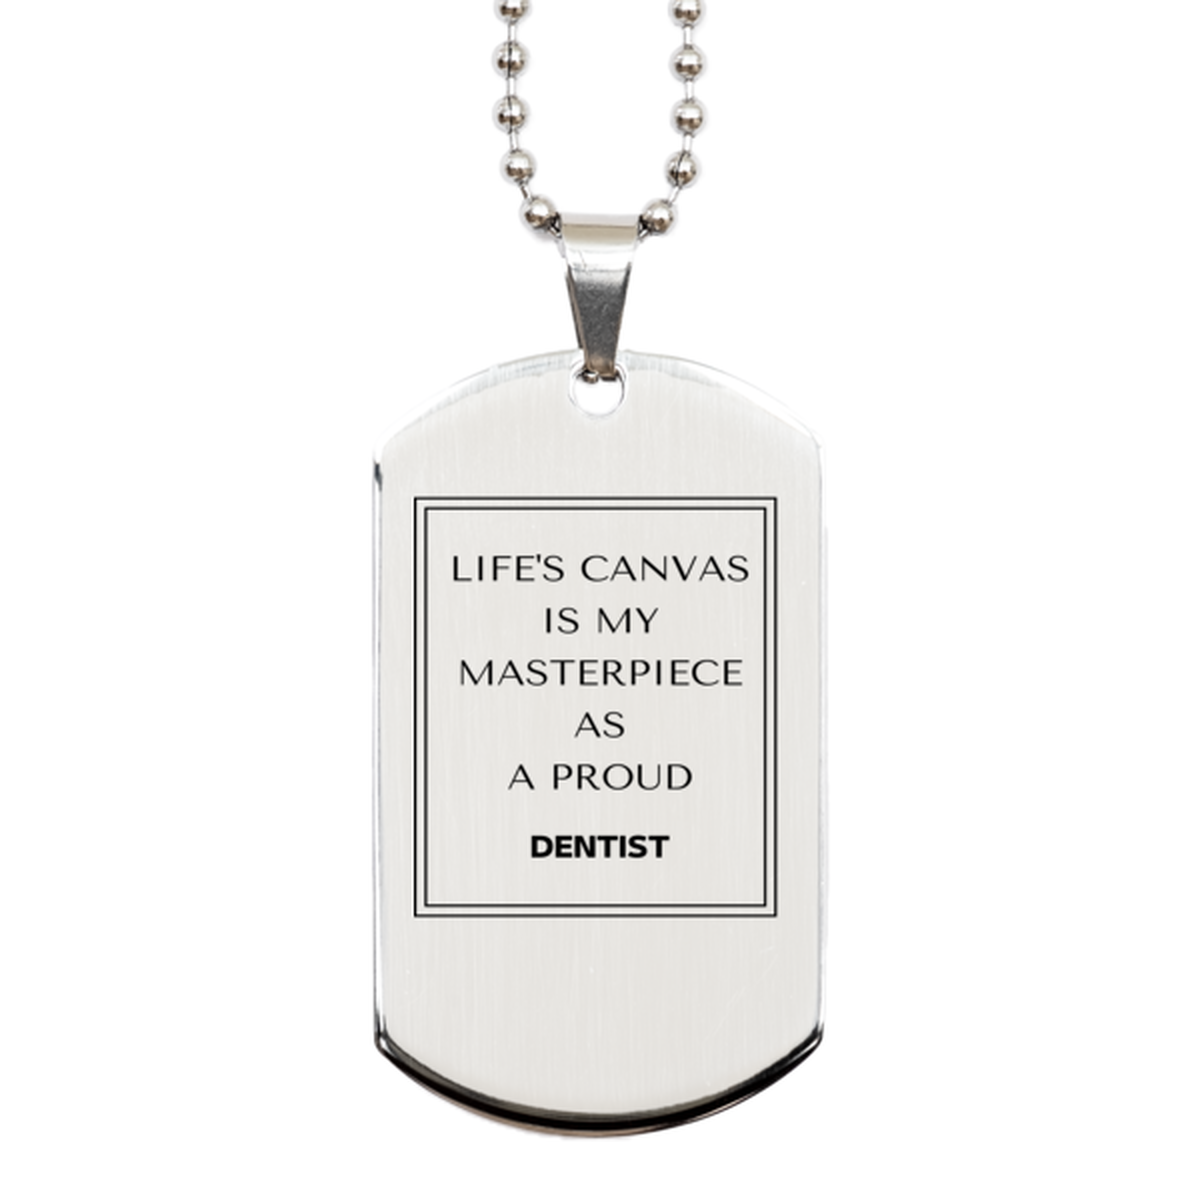 Proud Dentist Gifts, Life's canvas is my masterpiece, Epic Birthday Christmas Unique Silver Dog Tag For Dentist, Coworkers, Men, Women, Friends